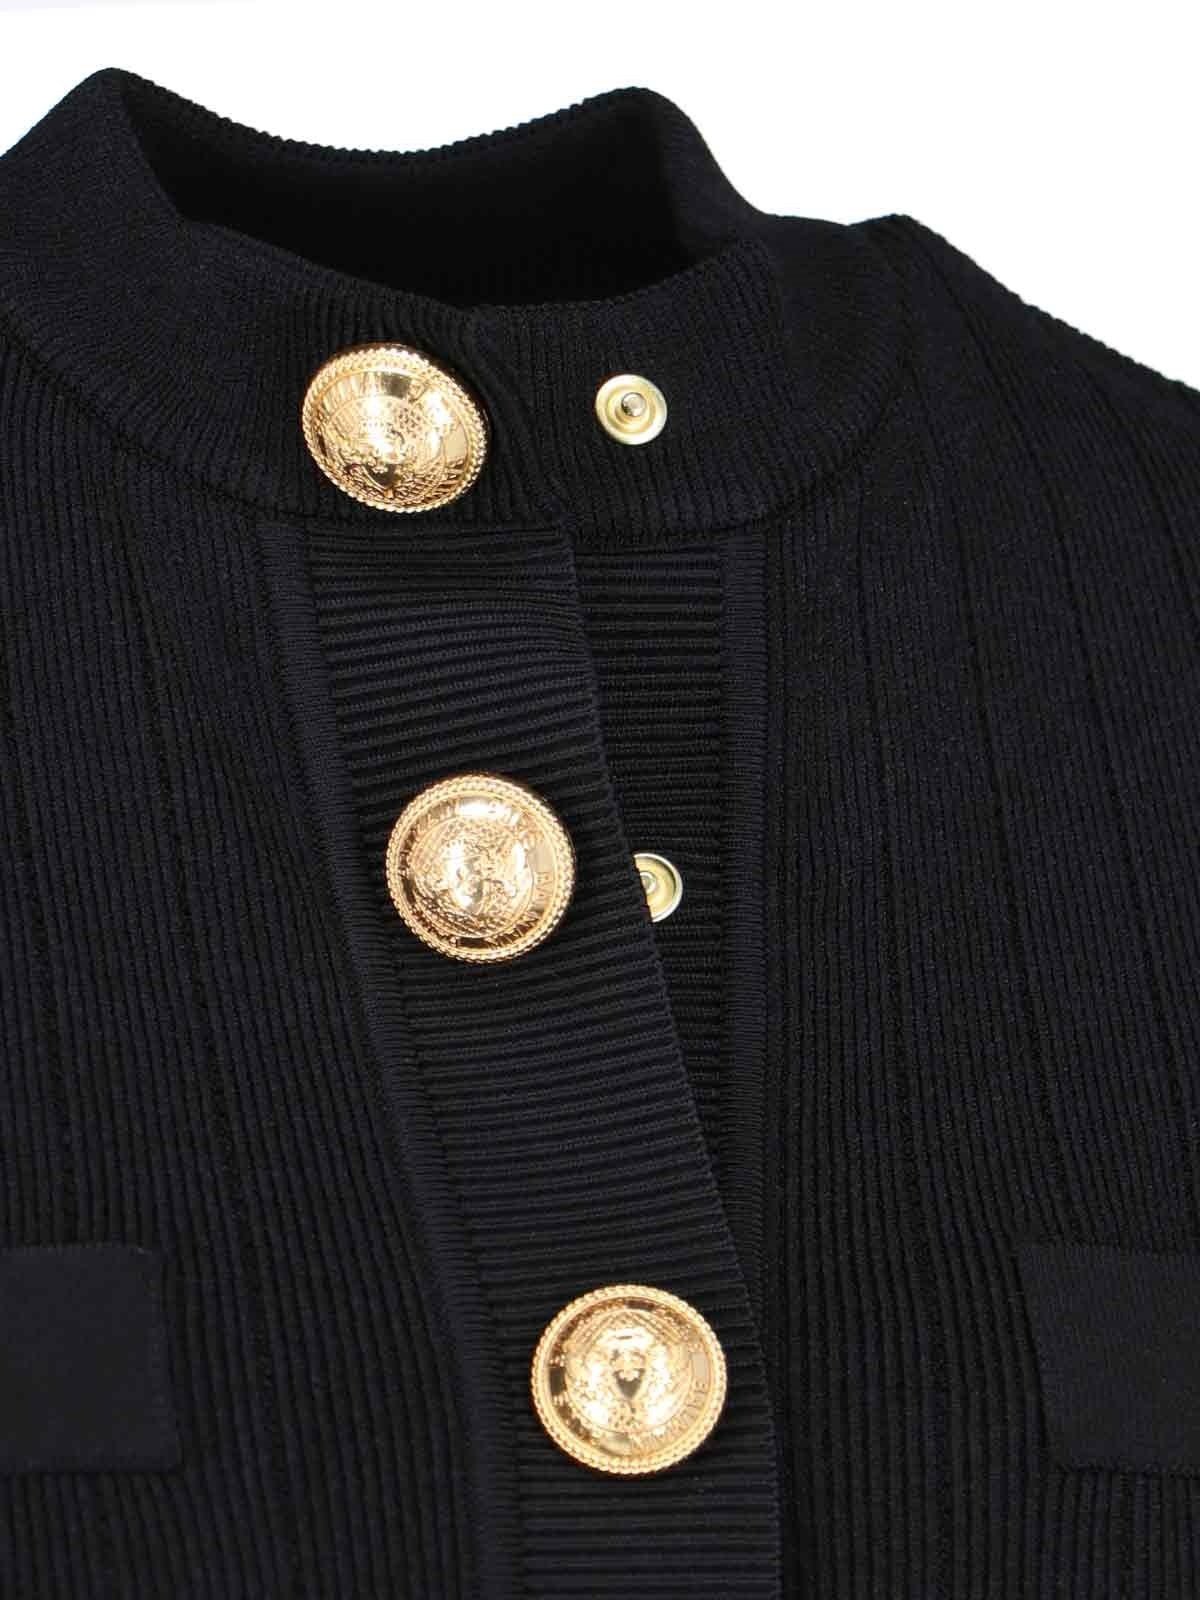 GOLD BUTTONS CARDIGAN - 5